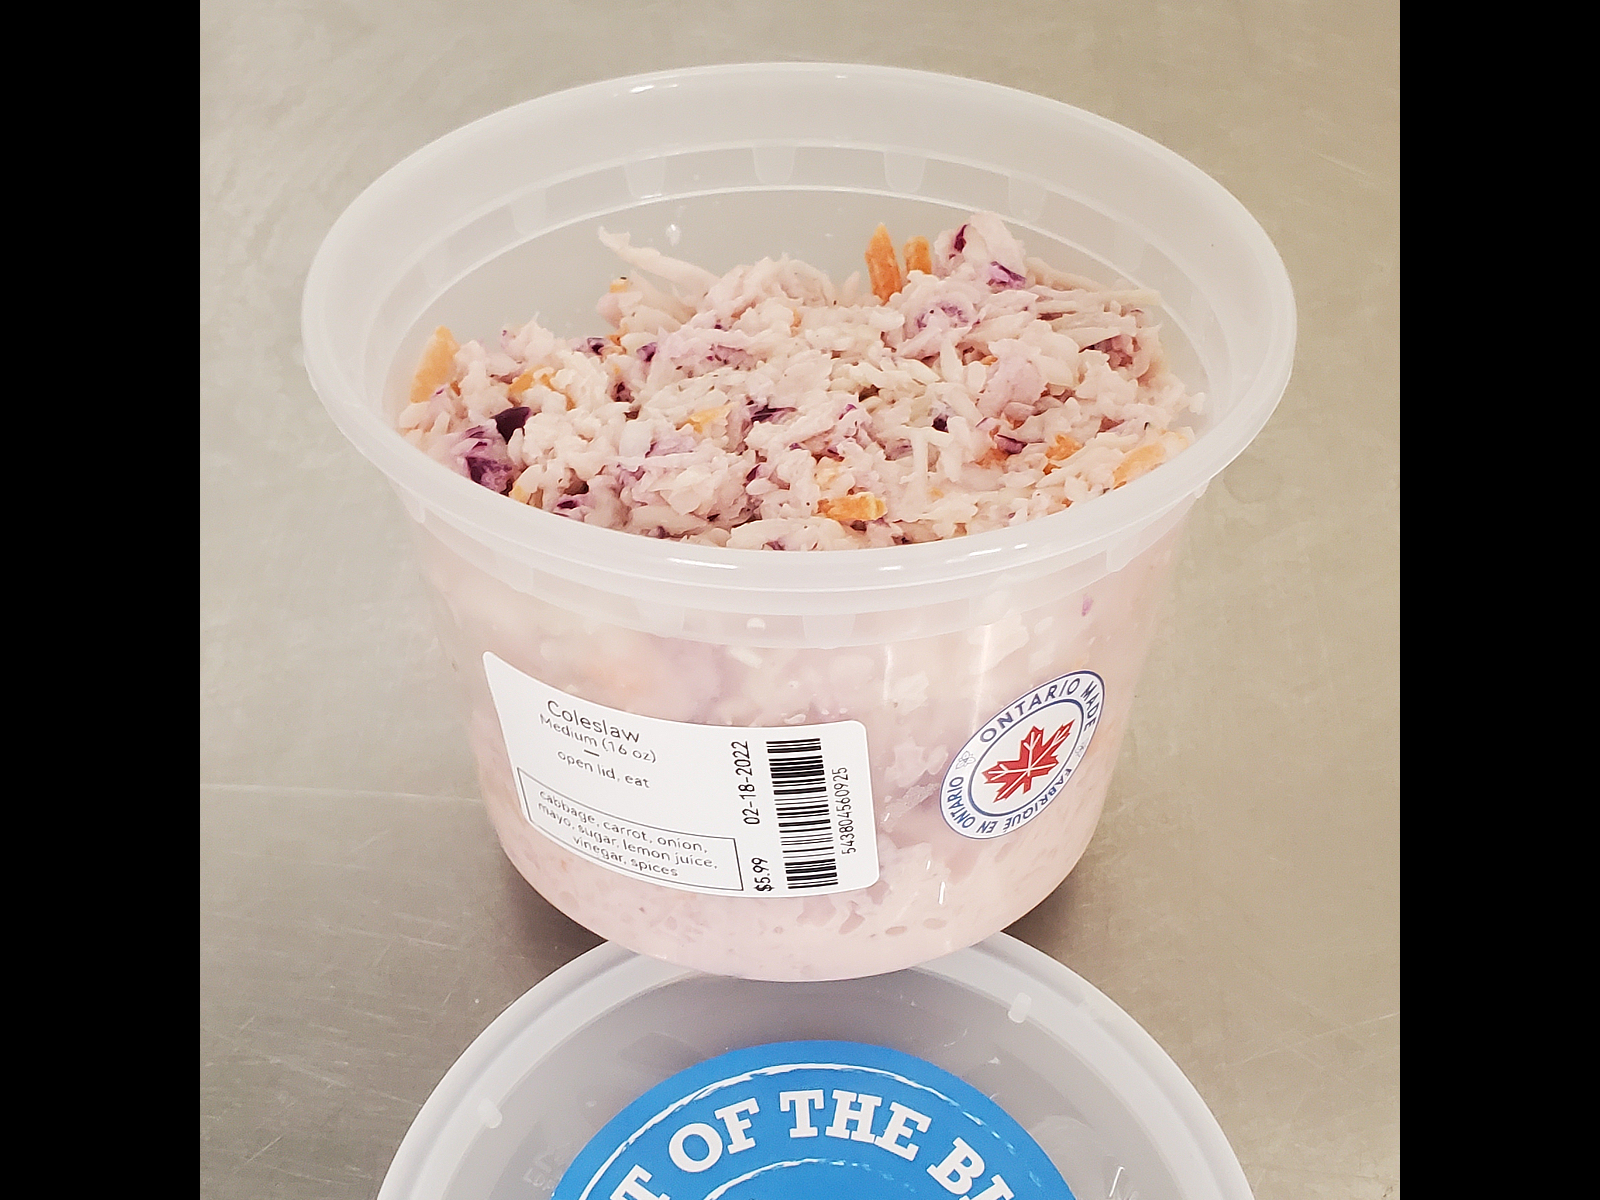 Out of the Blue // Seafood Market // Bayfield, Ontario // Coleslaw 16 oz